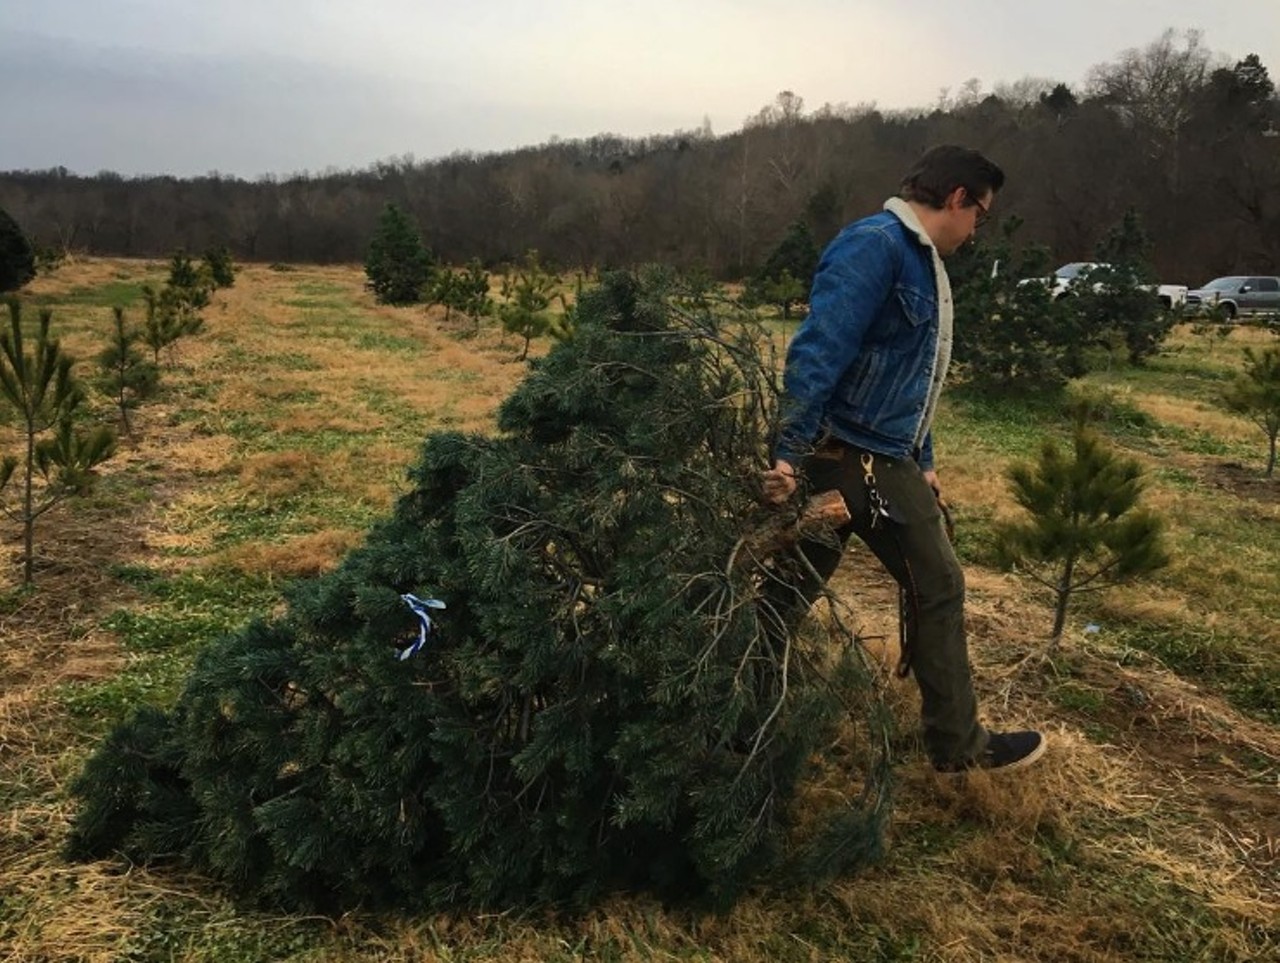 Meert Tree Farm
14560 Dry Fork Rd.
Festus, MO 63028
(636) 931-3901
Take a wagon ride out to the field at this locally owned tree farm, where you find just the right Christmas tree and cut it yourself. The people at Meert Tree Farm will also shake and bail your tree to make sure all the dead needles are out. Photo courtesy of Instagram / teri_haas.